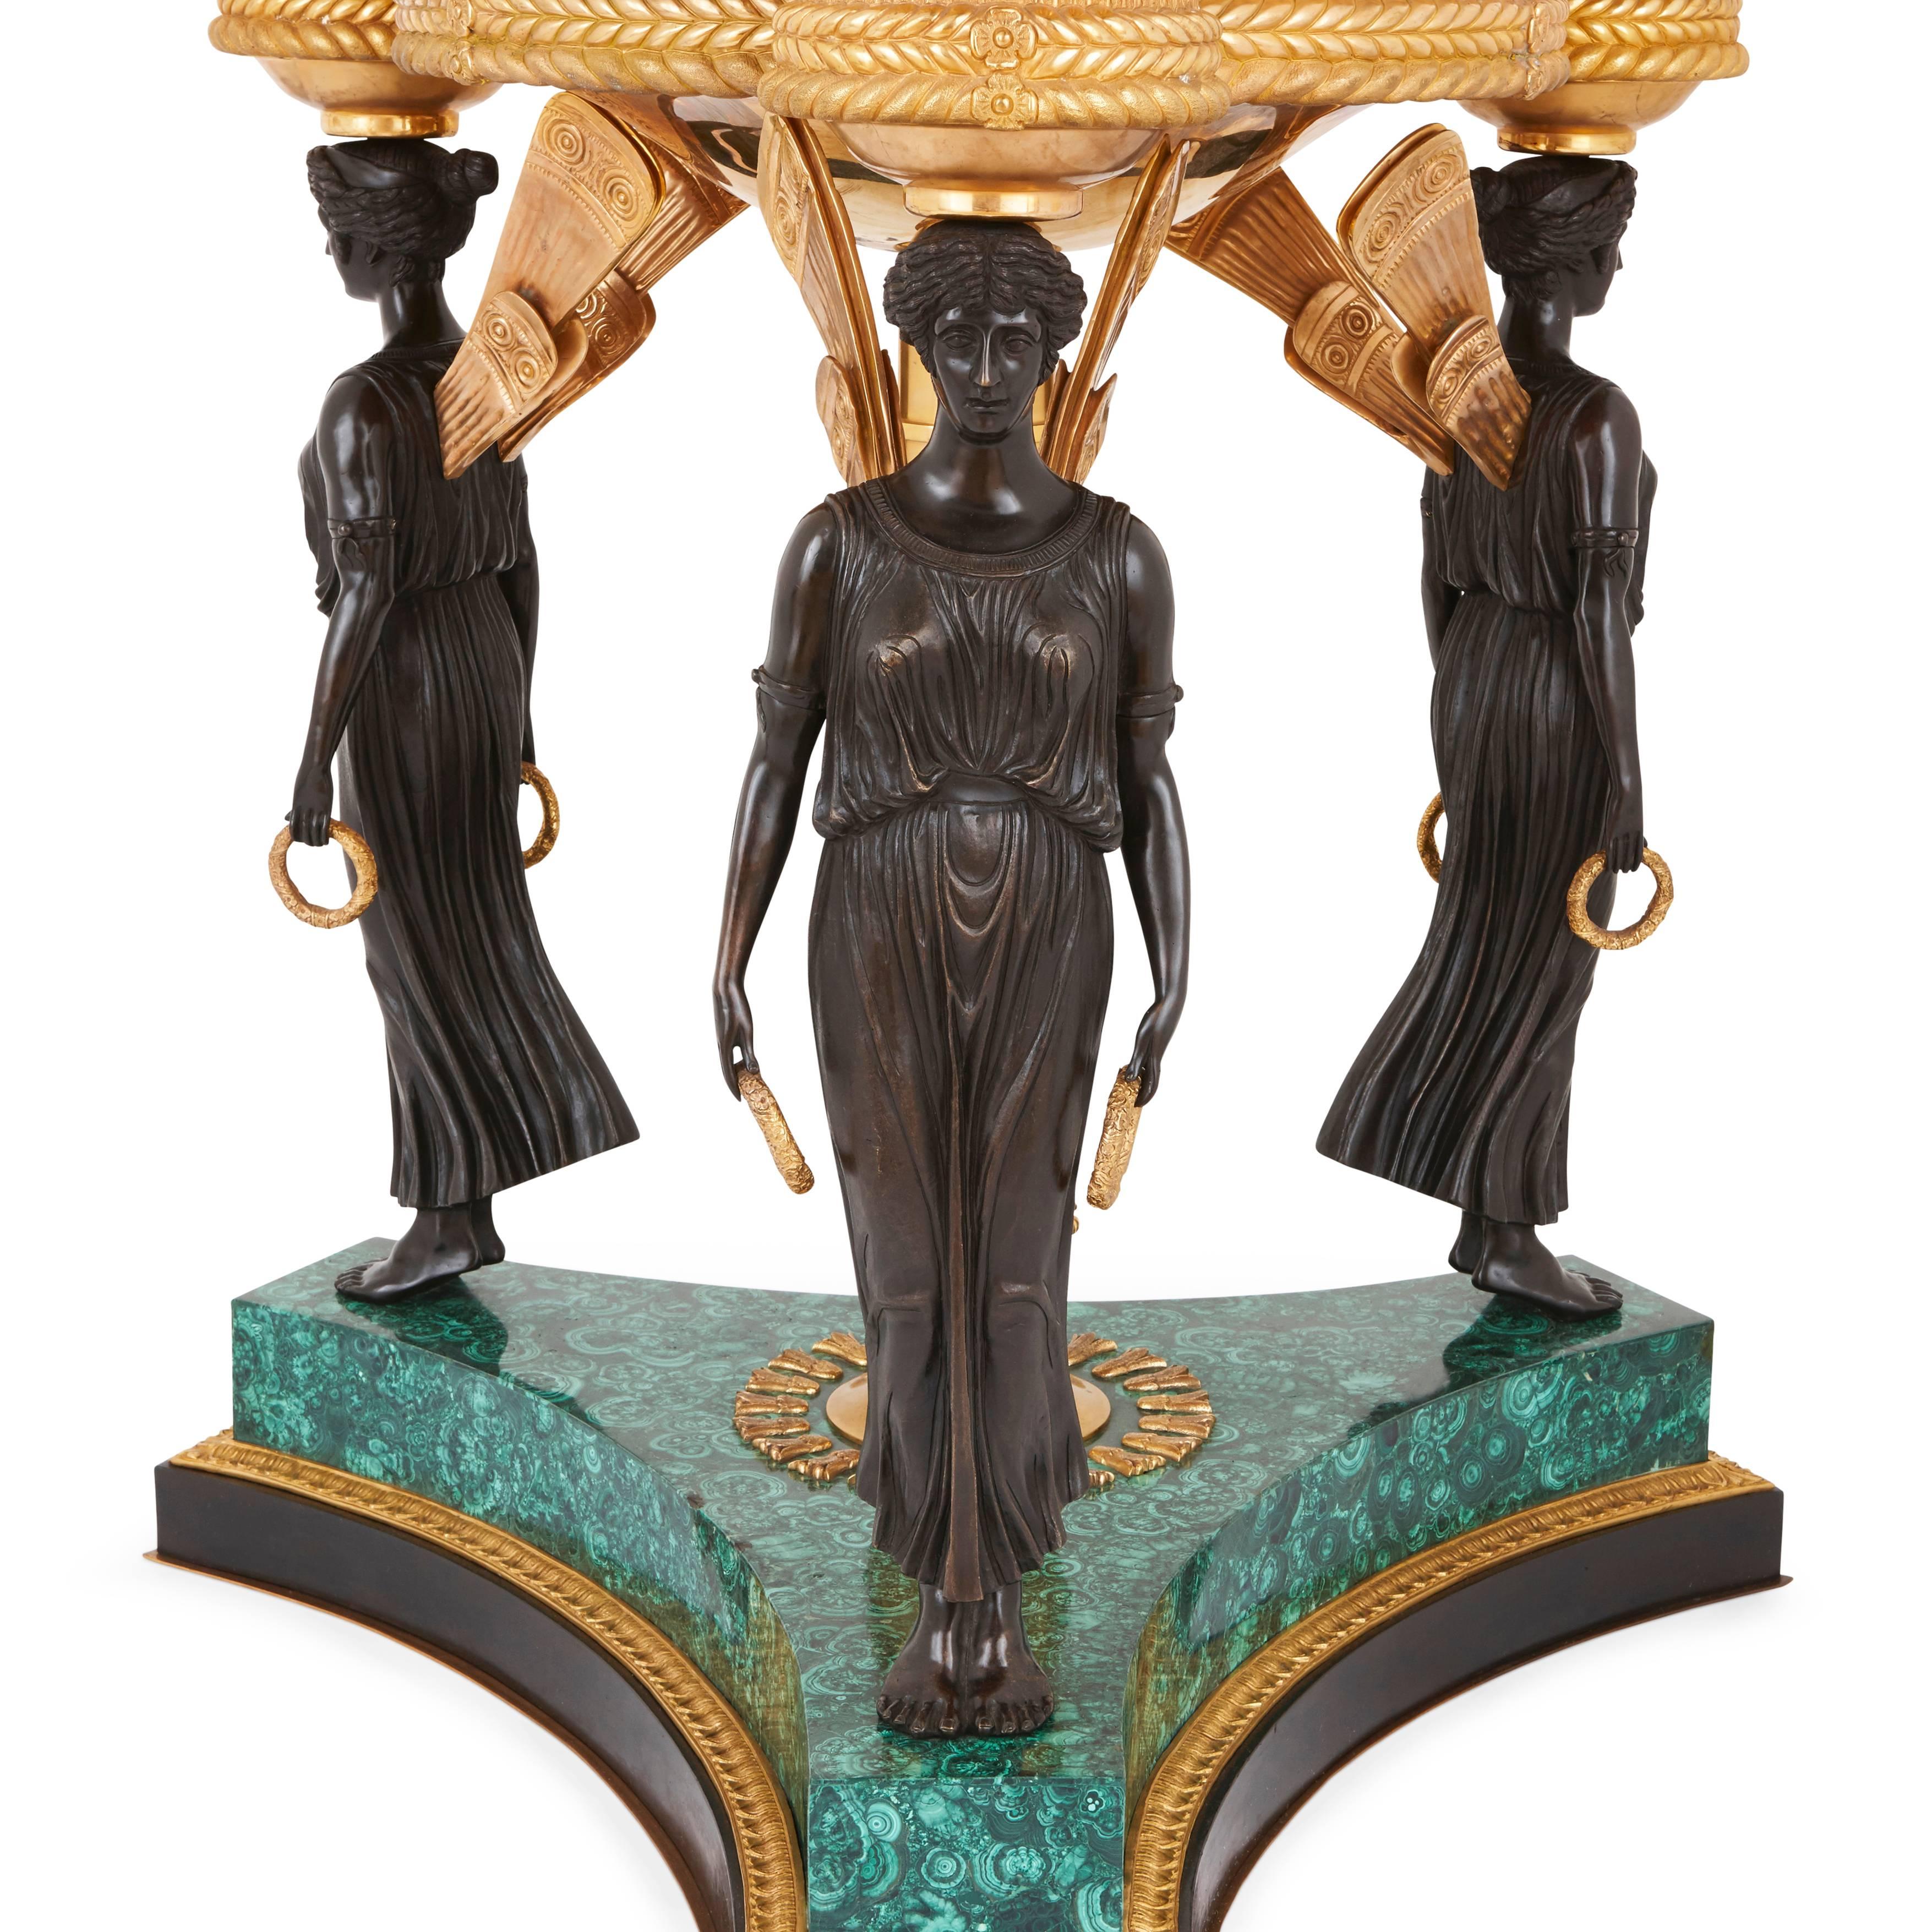 French Pair of Empire Style Gilt, Patinated Bronze and Malachite Antique Jardinières